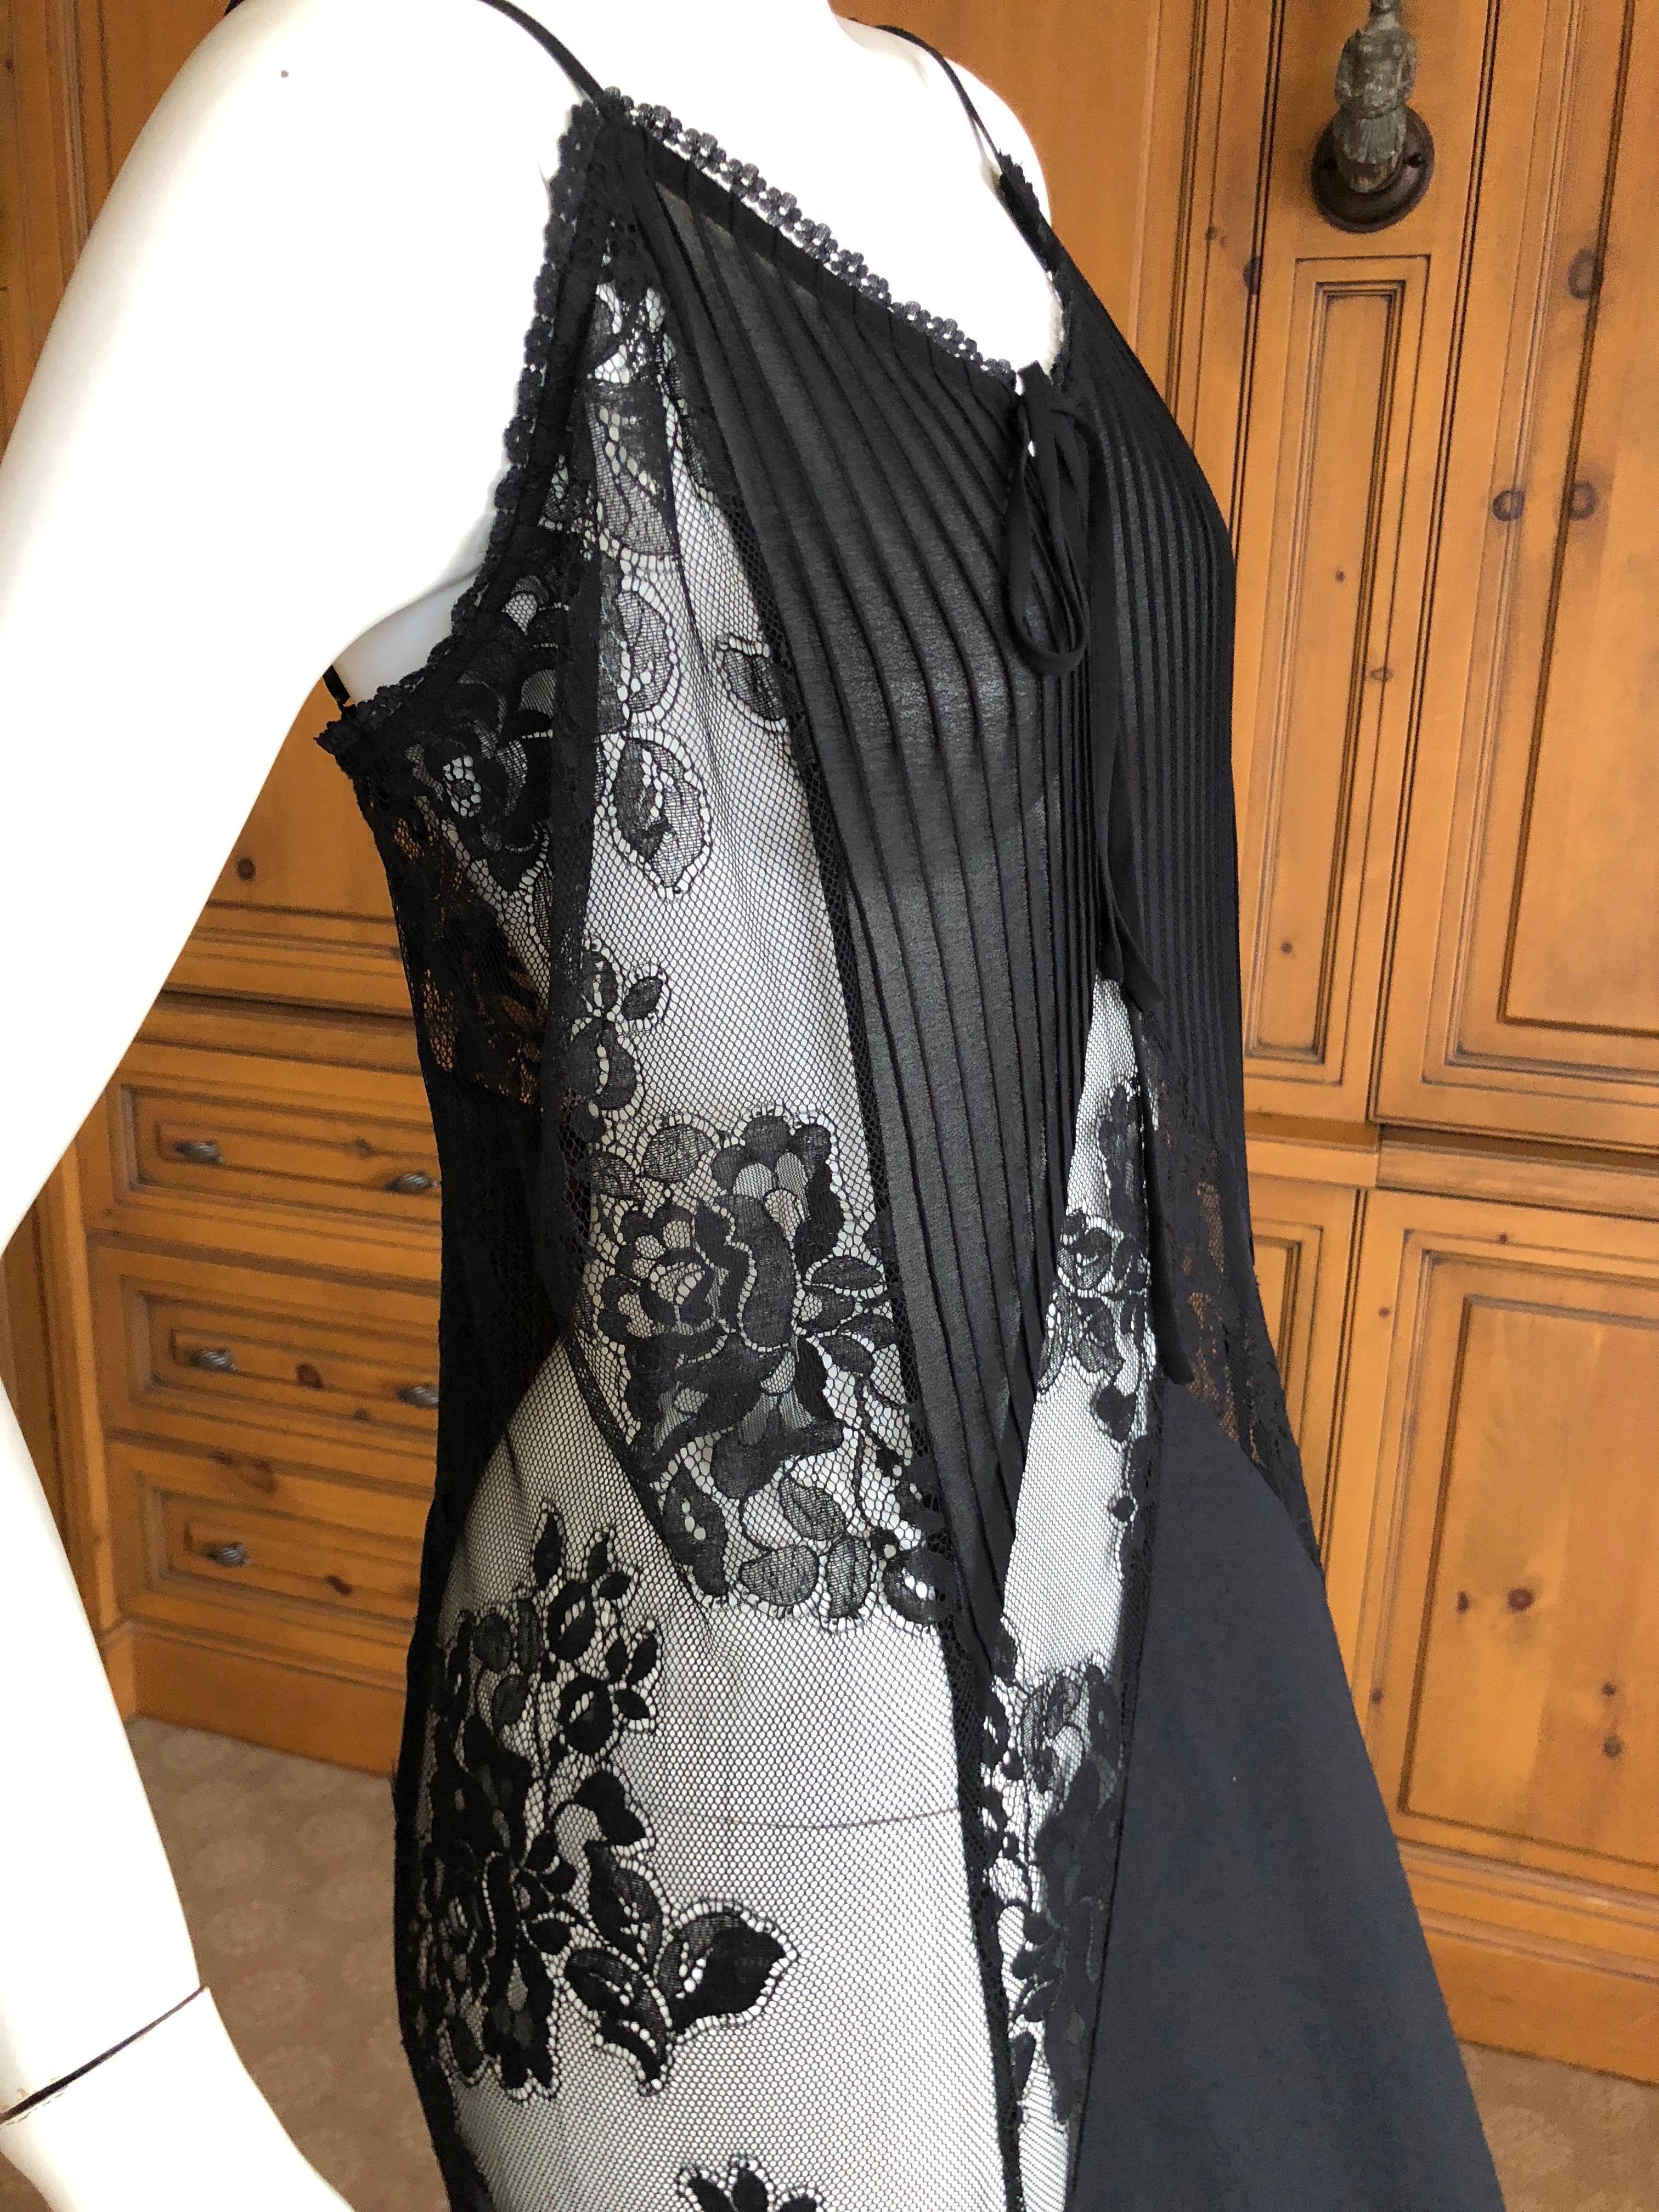 Alexander McQueen for McQ  Long Sheer Black Lace Dress Size L In Excellent Condition For Sale In Cloverdale, CA